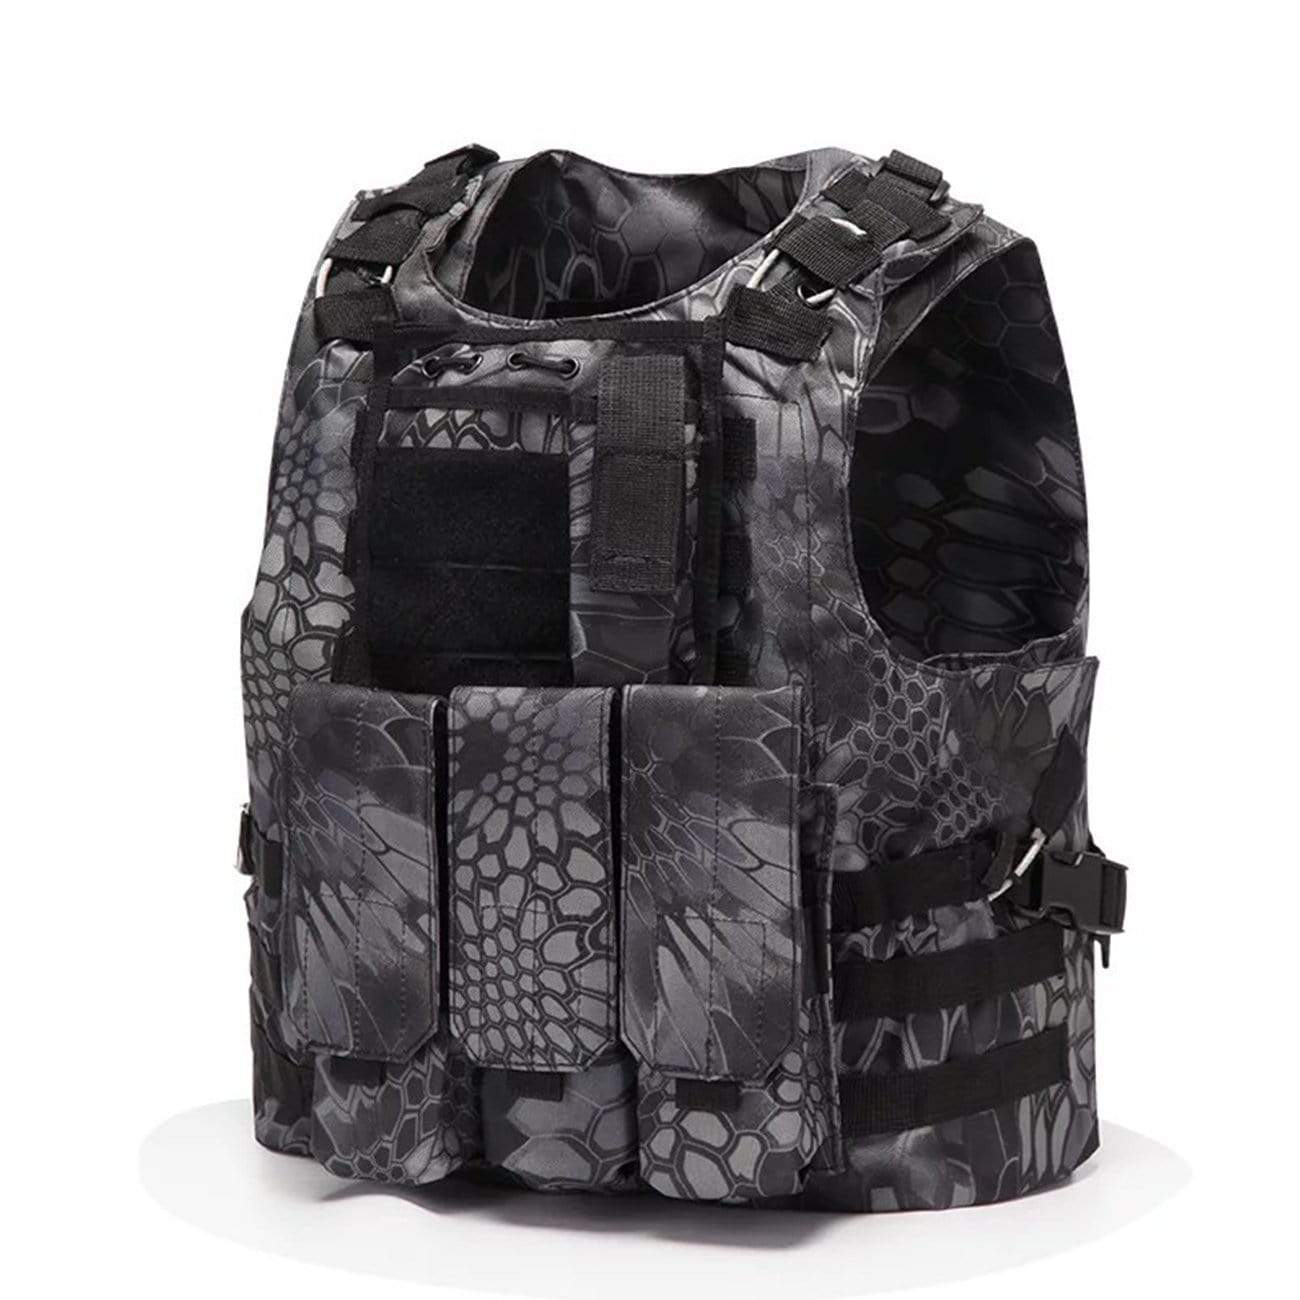 Tactical Camouflage Vest Streetwear Brand Techwear Combat Tactical YUGEN THEORY